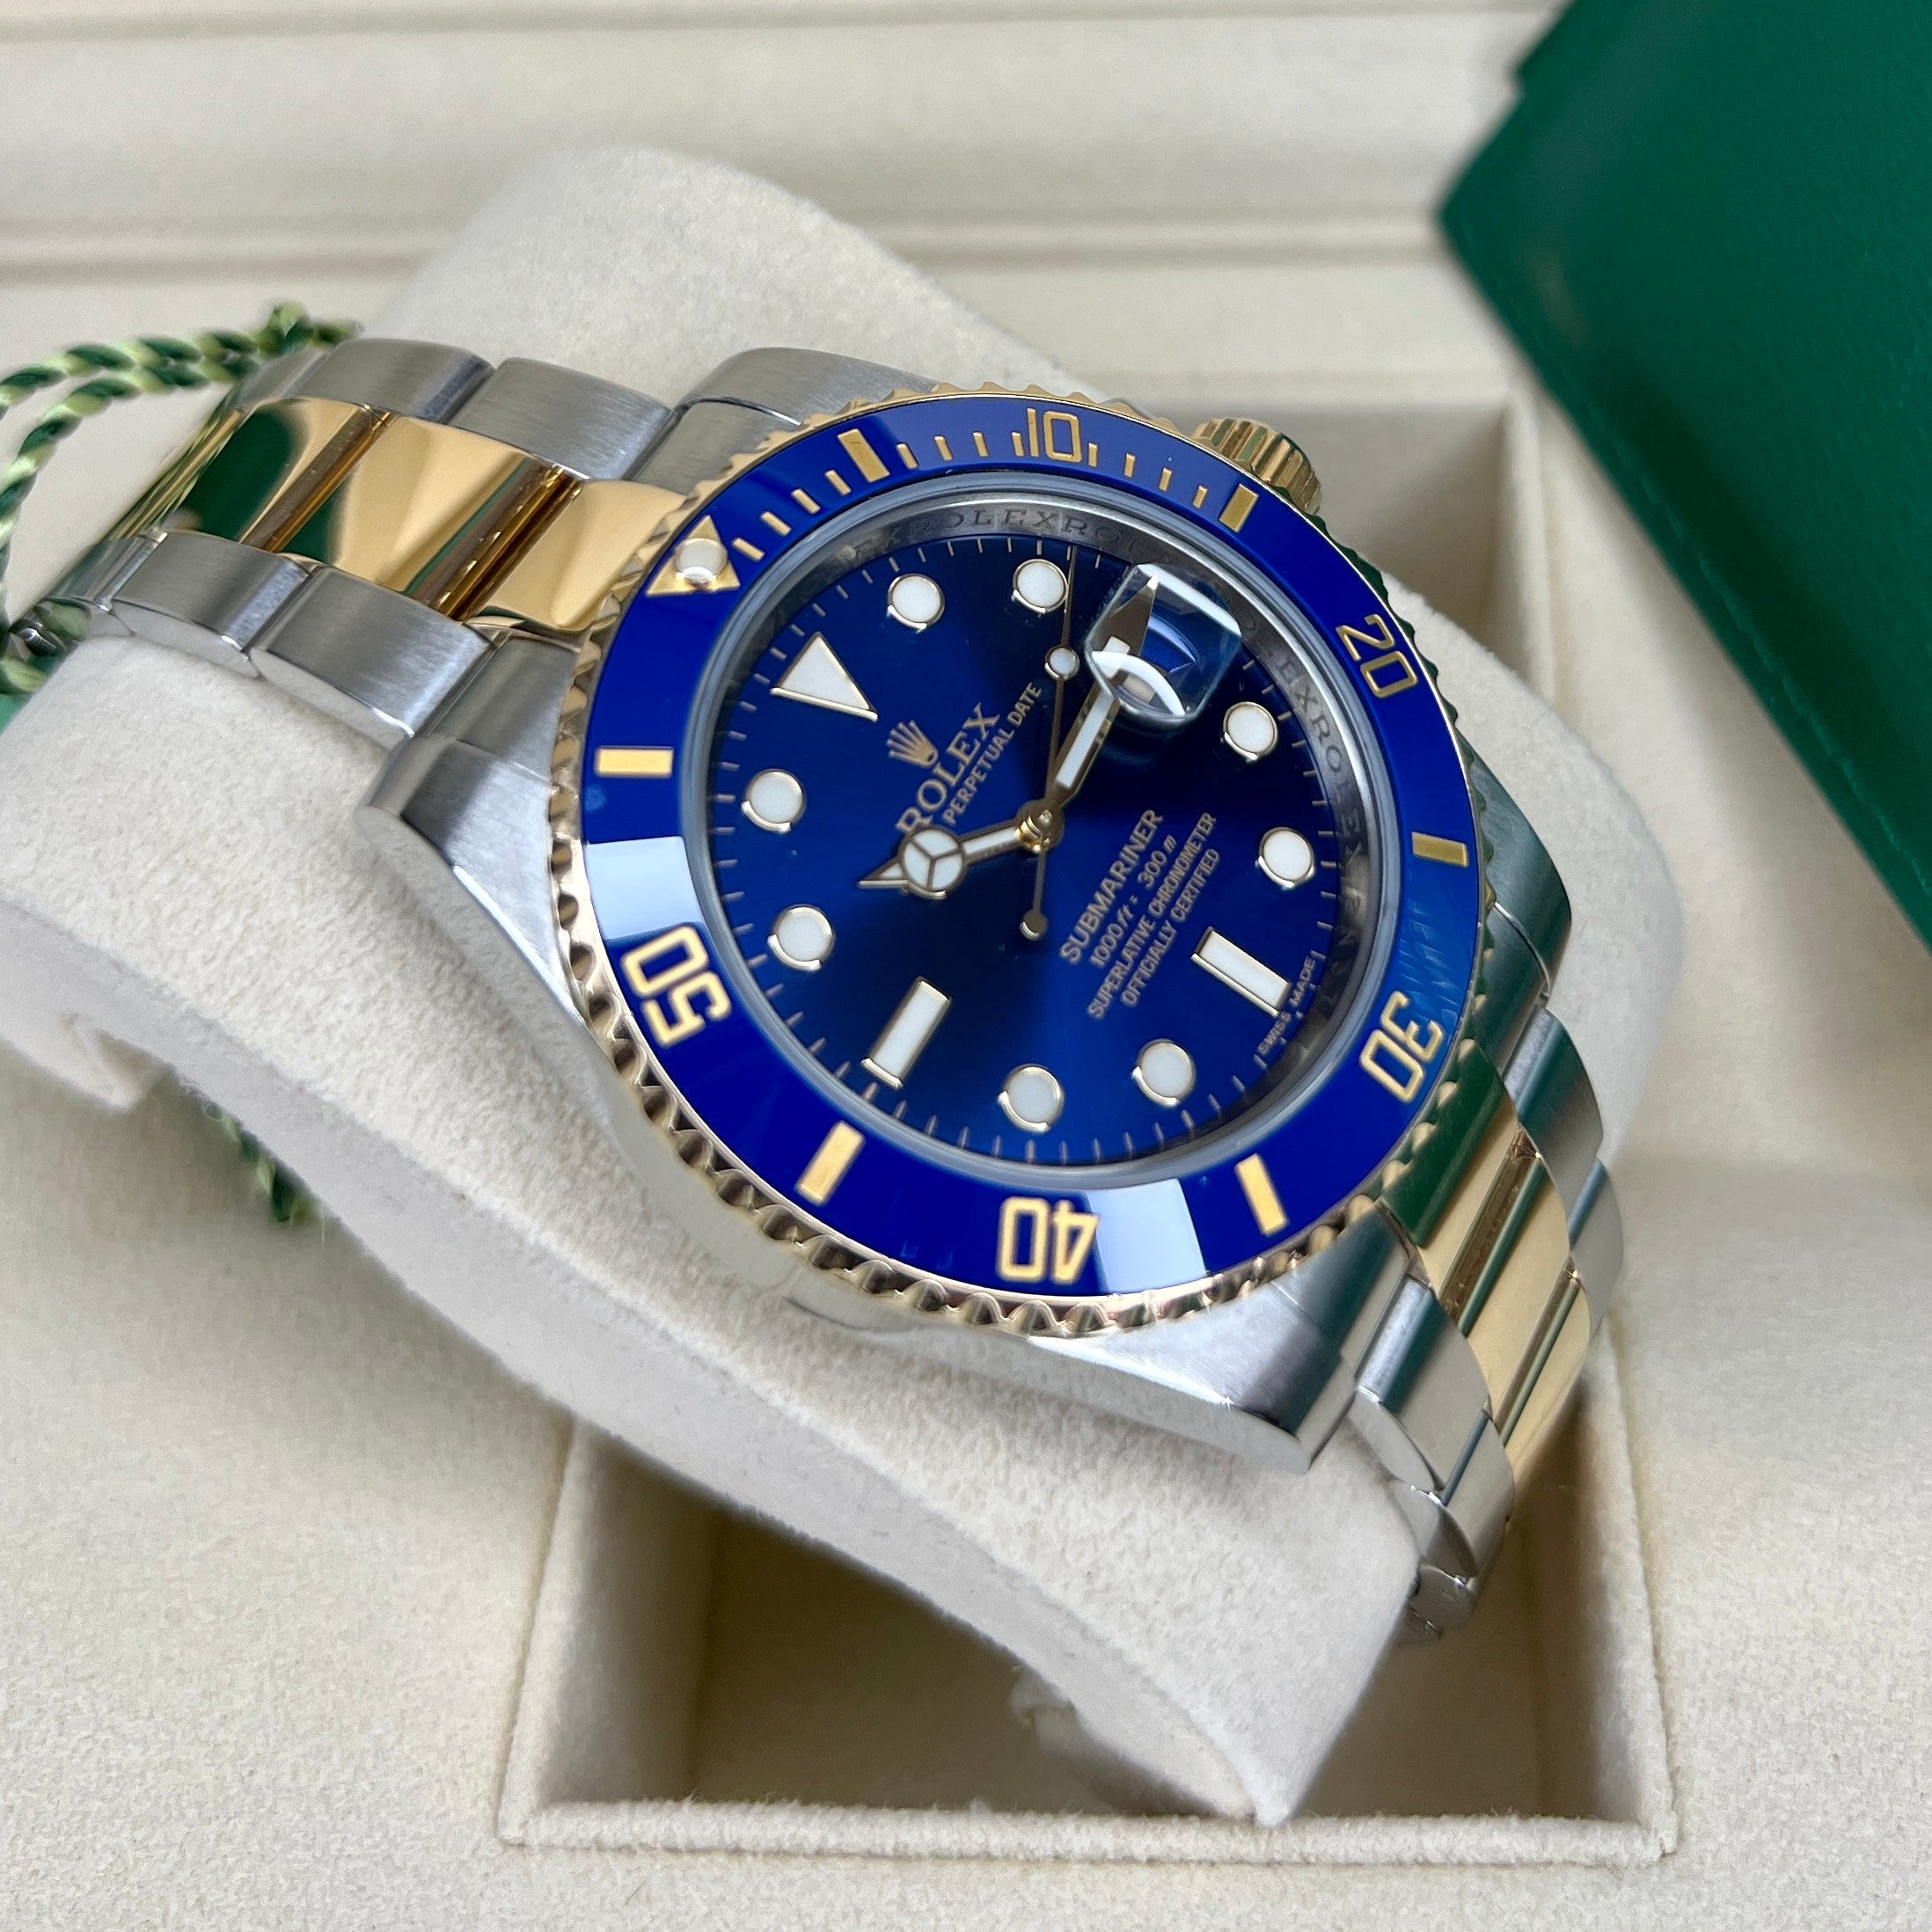 Rolex Oyster Submariner 40 Watch 116613LB - Box & Papers / Unworn